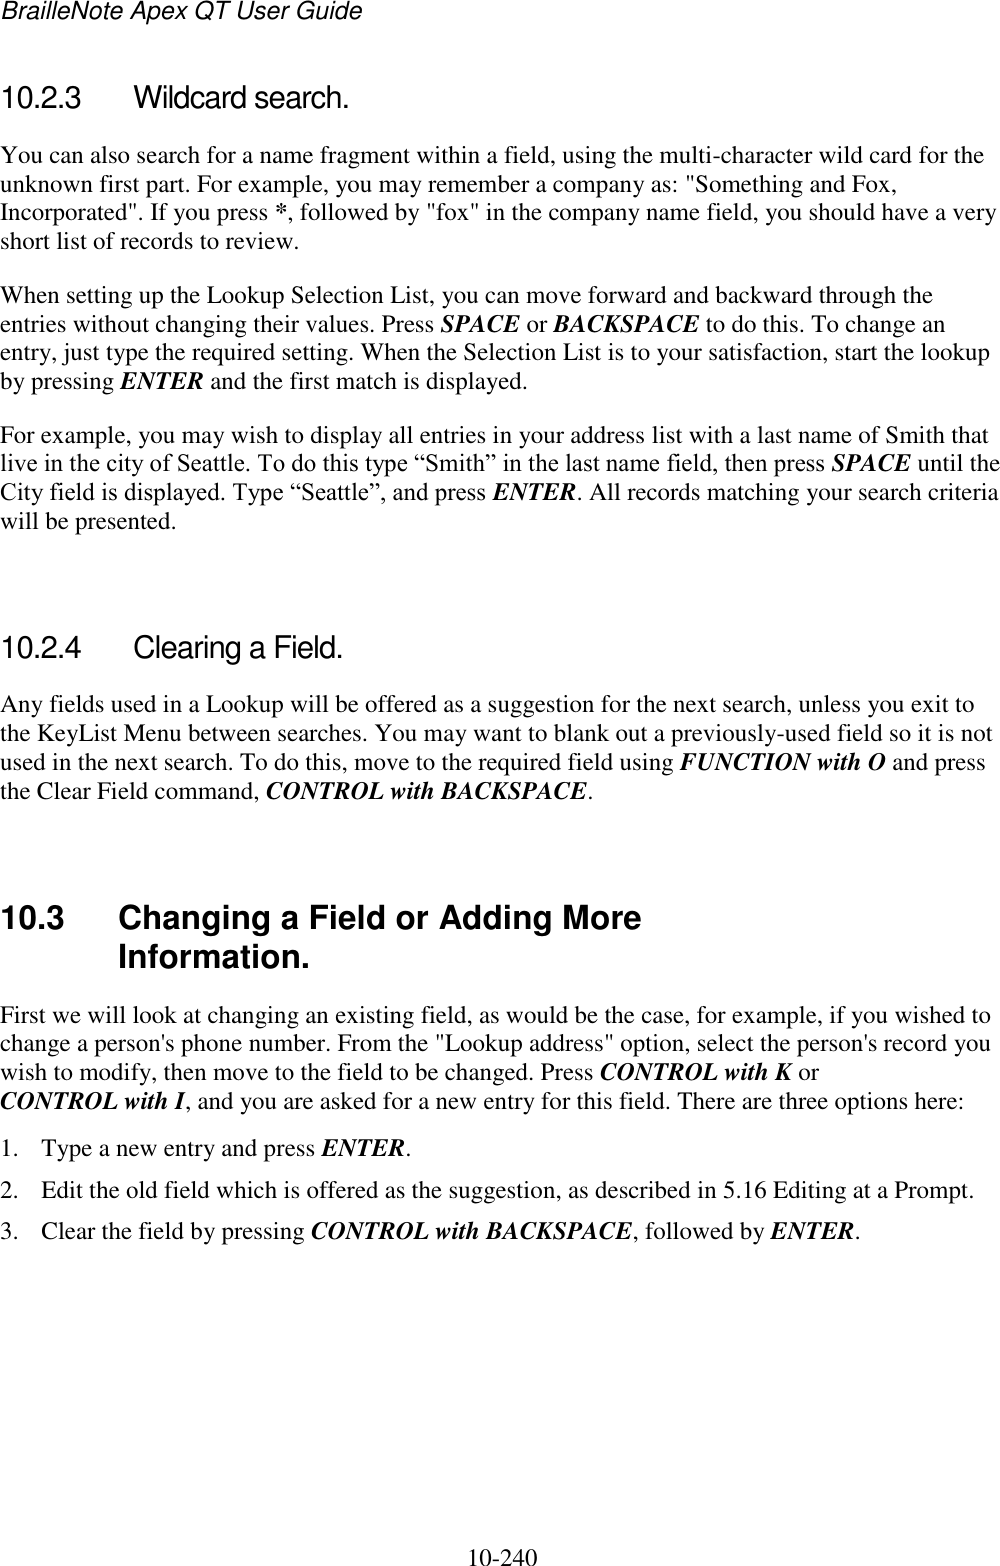 BrailleNote Apex QT User Guide  10-240   10.2.3  Wildcard search. You can also search for a name fragment within a field, using the multi-character wild card for the unknown first part. For example, you may remember a company as: &quot;Something and Fox, Incorporated&quot;. If you press *, followed by &quot;fox&quot; in the company name field, you should have a very short list of records to review. When setting up the Lookup Selection List, you can move forward and backward through the entries without changing their values. Press SPACE or BACKSPACE to do this. To change an entry, just type the required setting. When the Selection List is to your satisfaction, start the lookup by pressing ENTER and the first match is displayed. For example, you may wish to display all entries in your address list with a last name of Smith that live in the city of Seattle. To do this type “Smith” in the last name field, then press SPACE until the City field is displayed. Type “Seattle”, and press ENTER. All records matching your search criteria will be presented.   10.2.4  Clearing a Field. Any fields used in a Lookup will be offered as a suggestion for the next search, unless you exit to the KeyList Menu between searches. You may want to blank out a previously-used field so it is not used in the next search. To do this, move to the required field using FUNCTION with O and press the Clear Field command, CONTROL with BACKSPACE.   10.3  Changing a Field or Adding More Information. First we will look at changing an existing field, as would be the case, for example, if you wished to change a person&apos;s phone number. From the &quot;Lookup address&quot; option, select the person&apos;s record you wish to modify, then move to the field to be changed. Press CONTROL with K or CONTROL with I, and you are asked for a new entry for this field. There are three options here: 1. Type a new entry and press ENTER. 2. Edit the old field which is offered as the suggestion, as described in 5.16 Editing at a Prompt. 3. Clear the field by pressing CONTROL with BACKSPACE, followed by ENTER. 